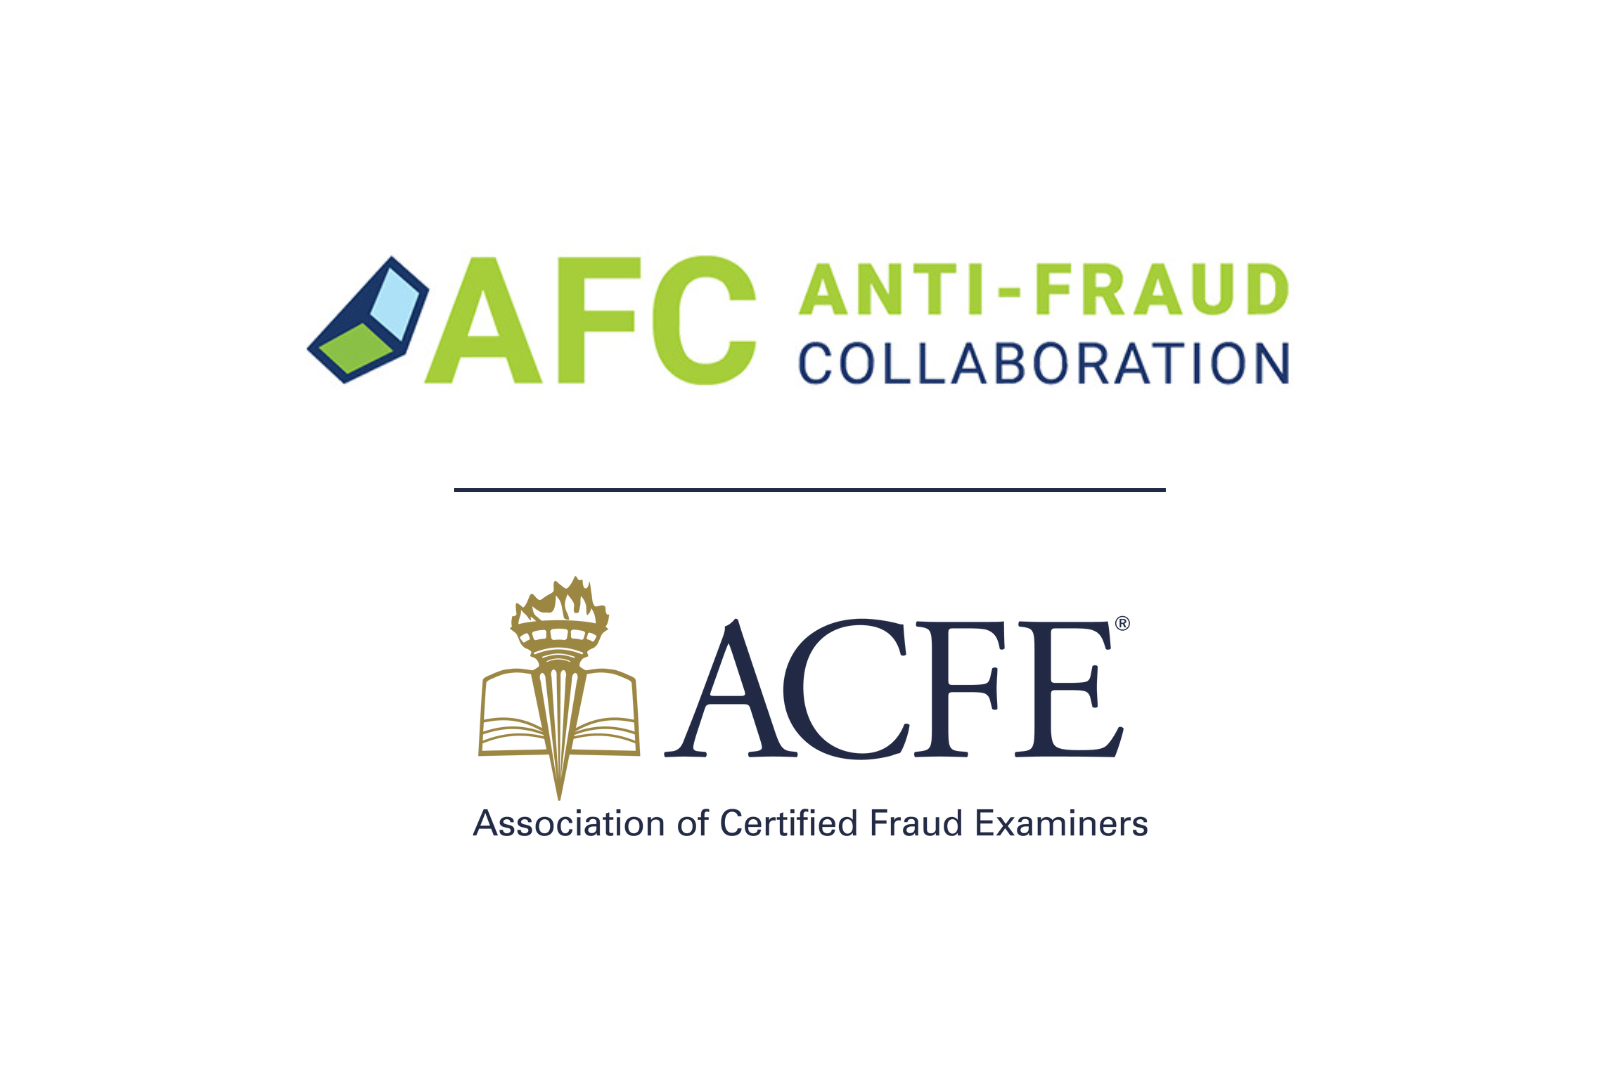 AFC AND ACFE